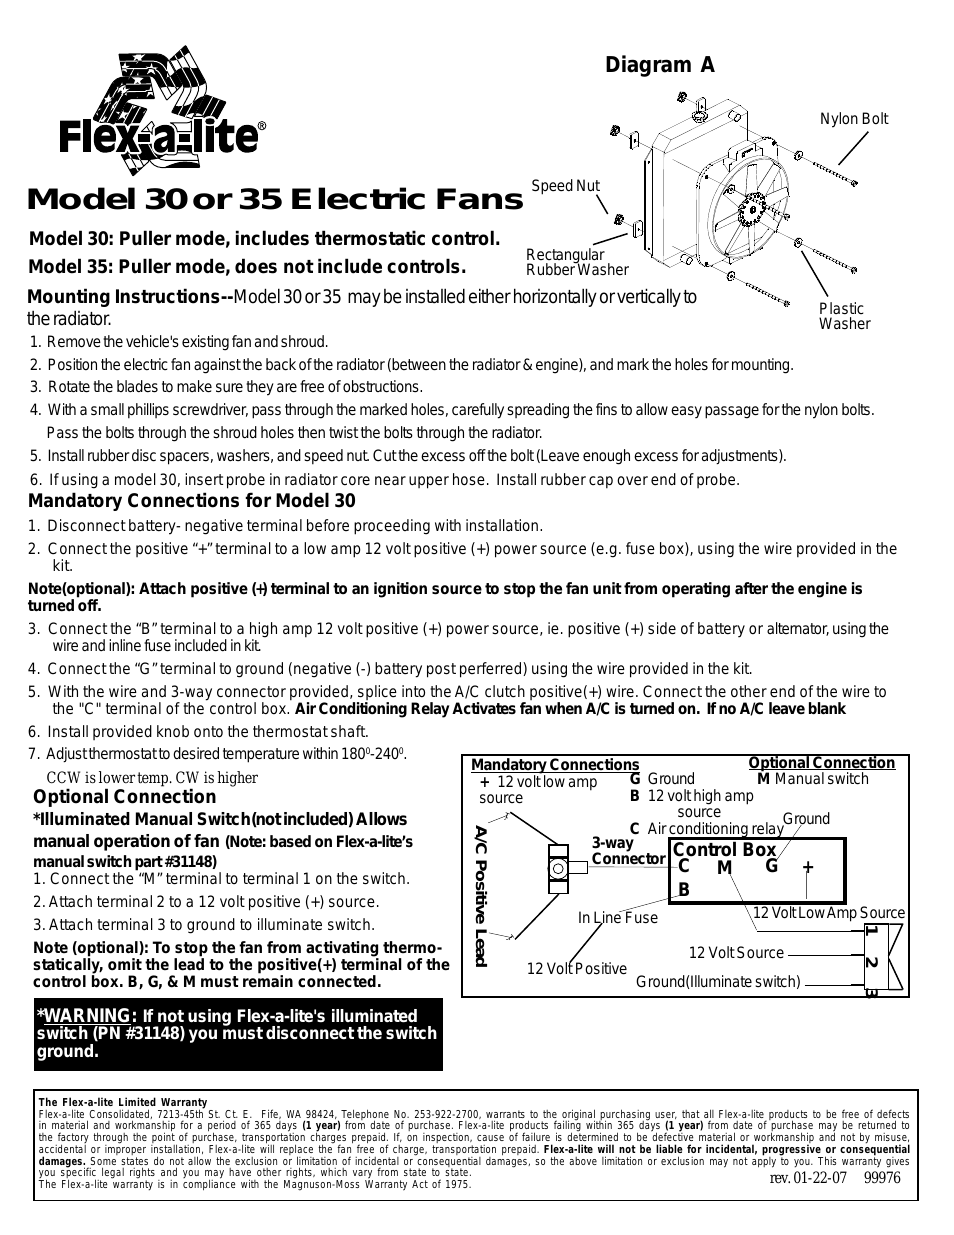 30 Electric Fans: Puller mode, includes thermostatic control